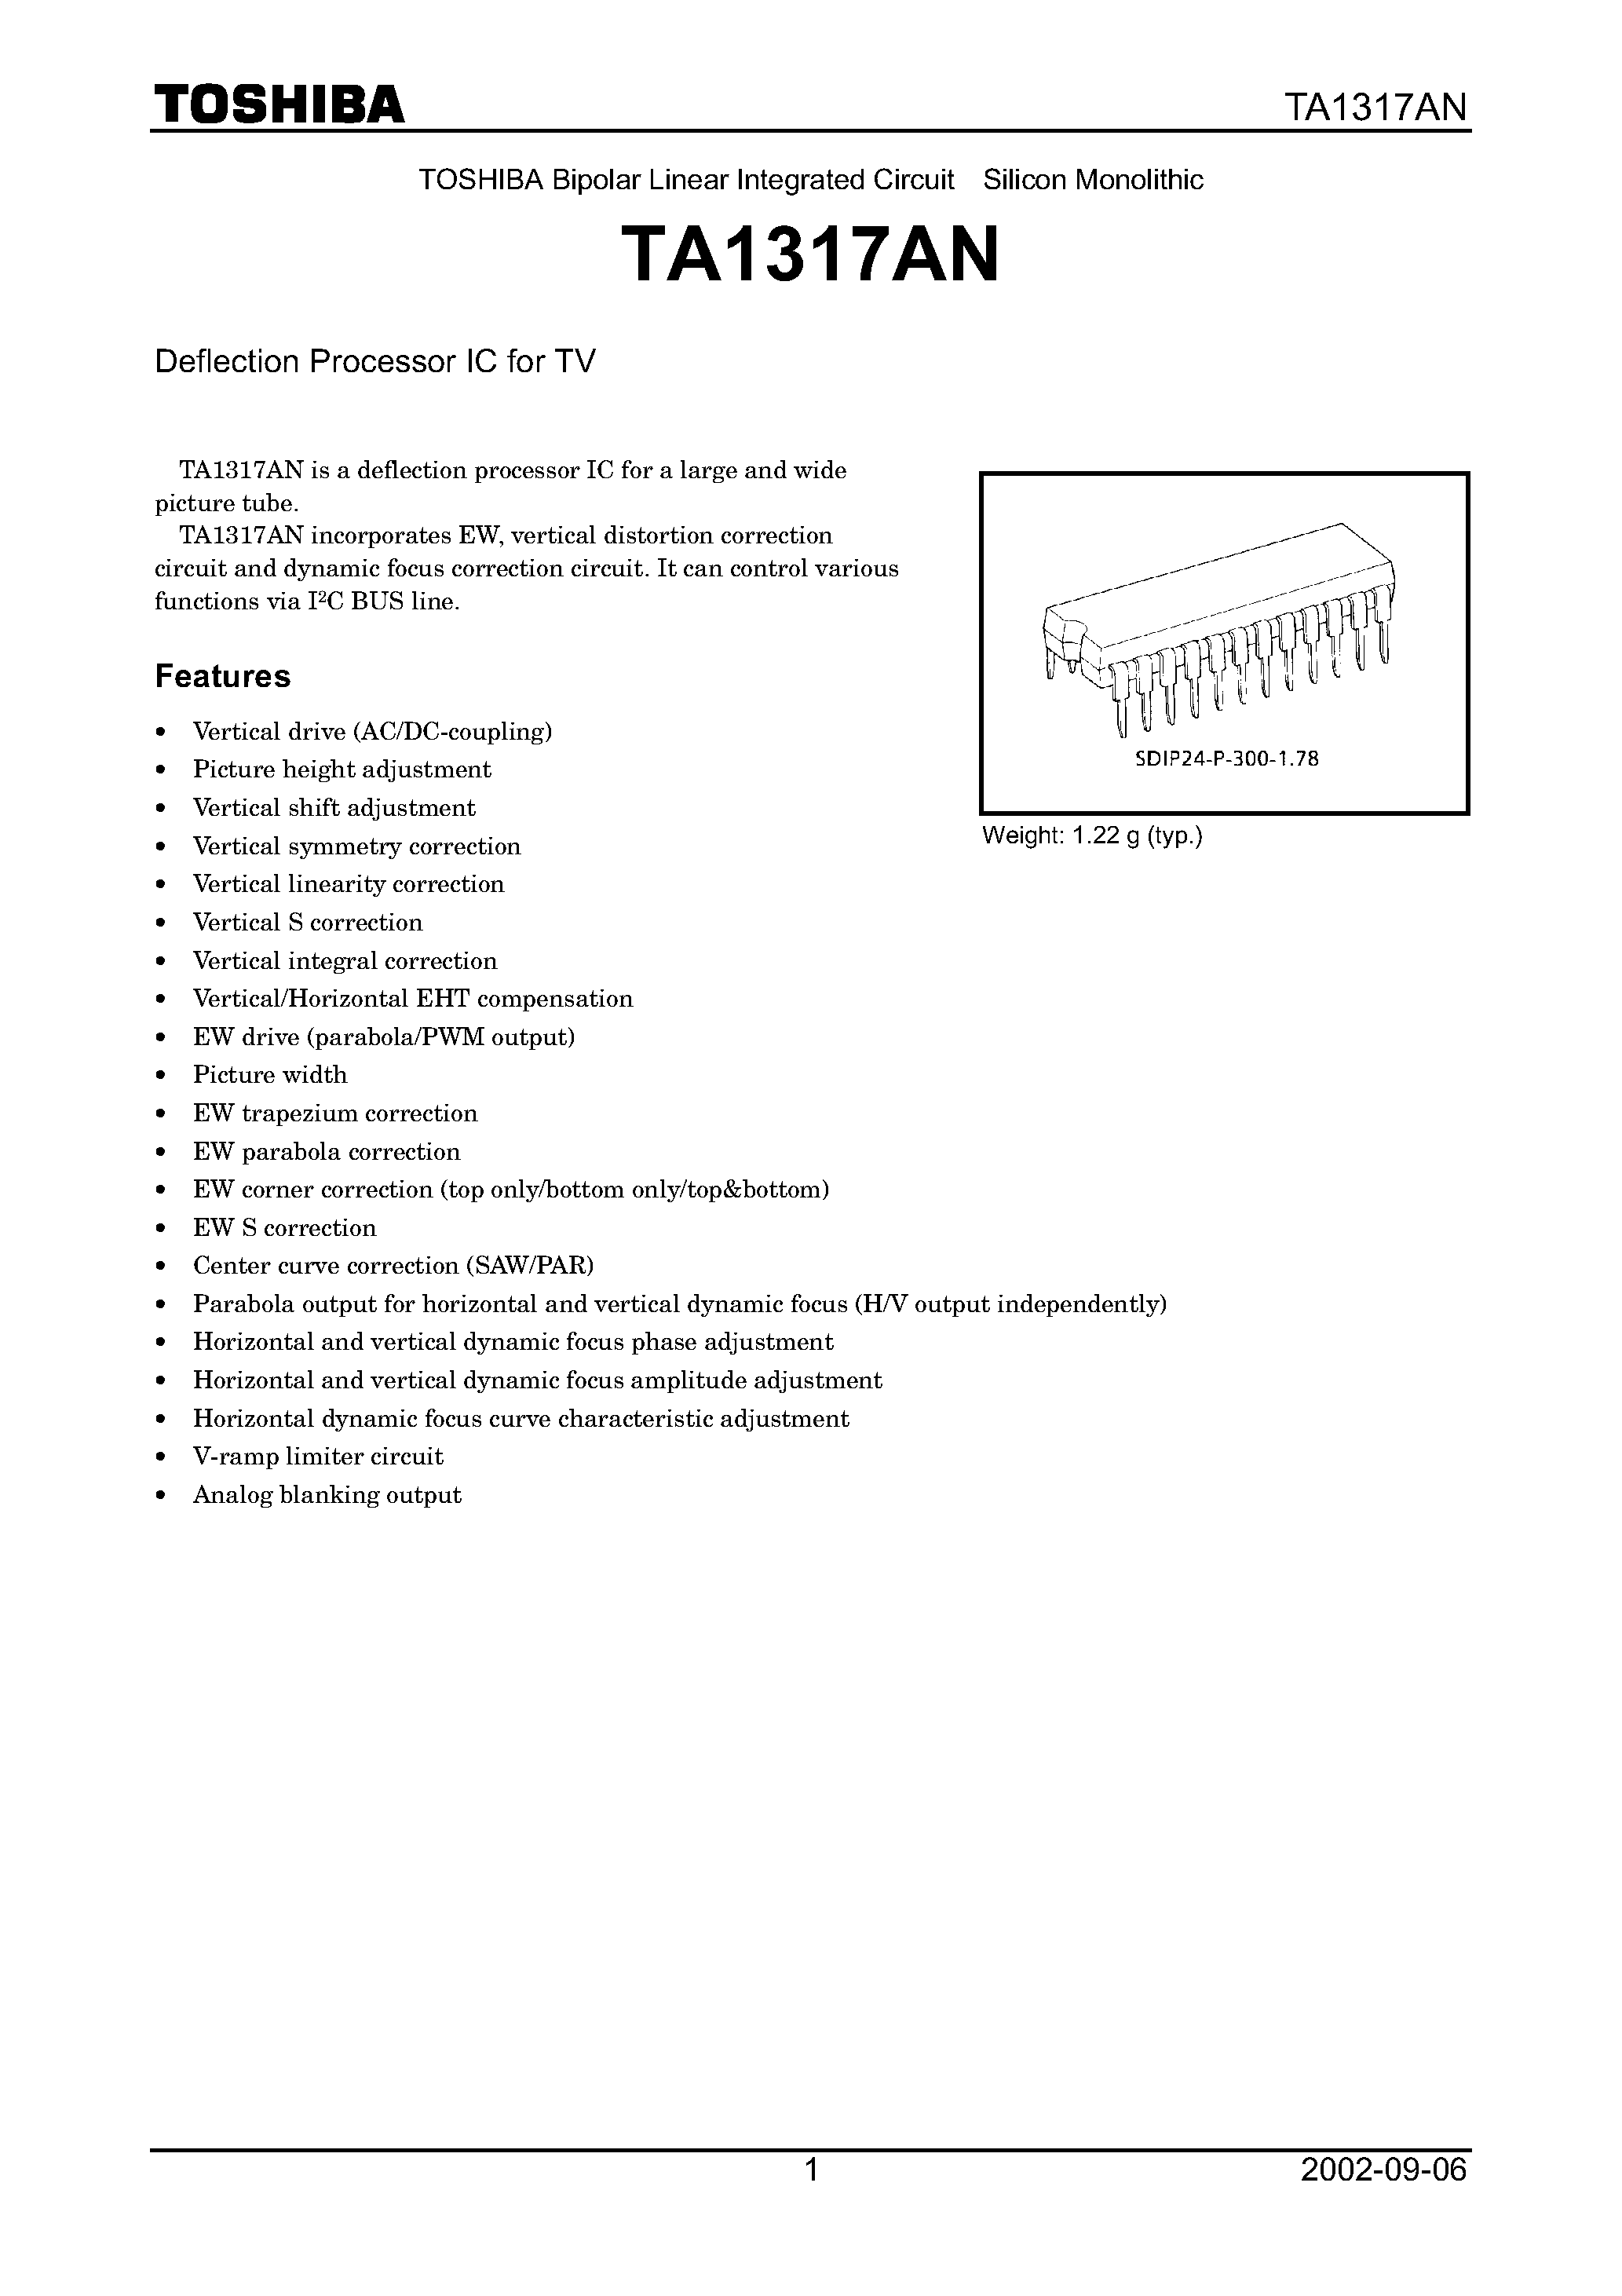 Datasheet TA1317AN - Deflection Processor IC for TV page 1